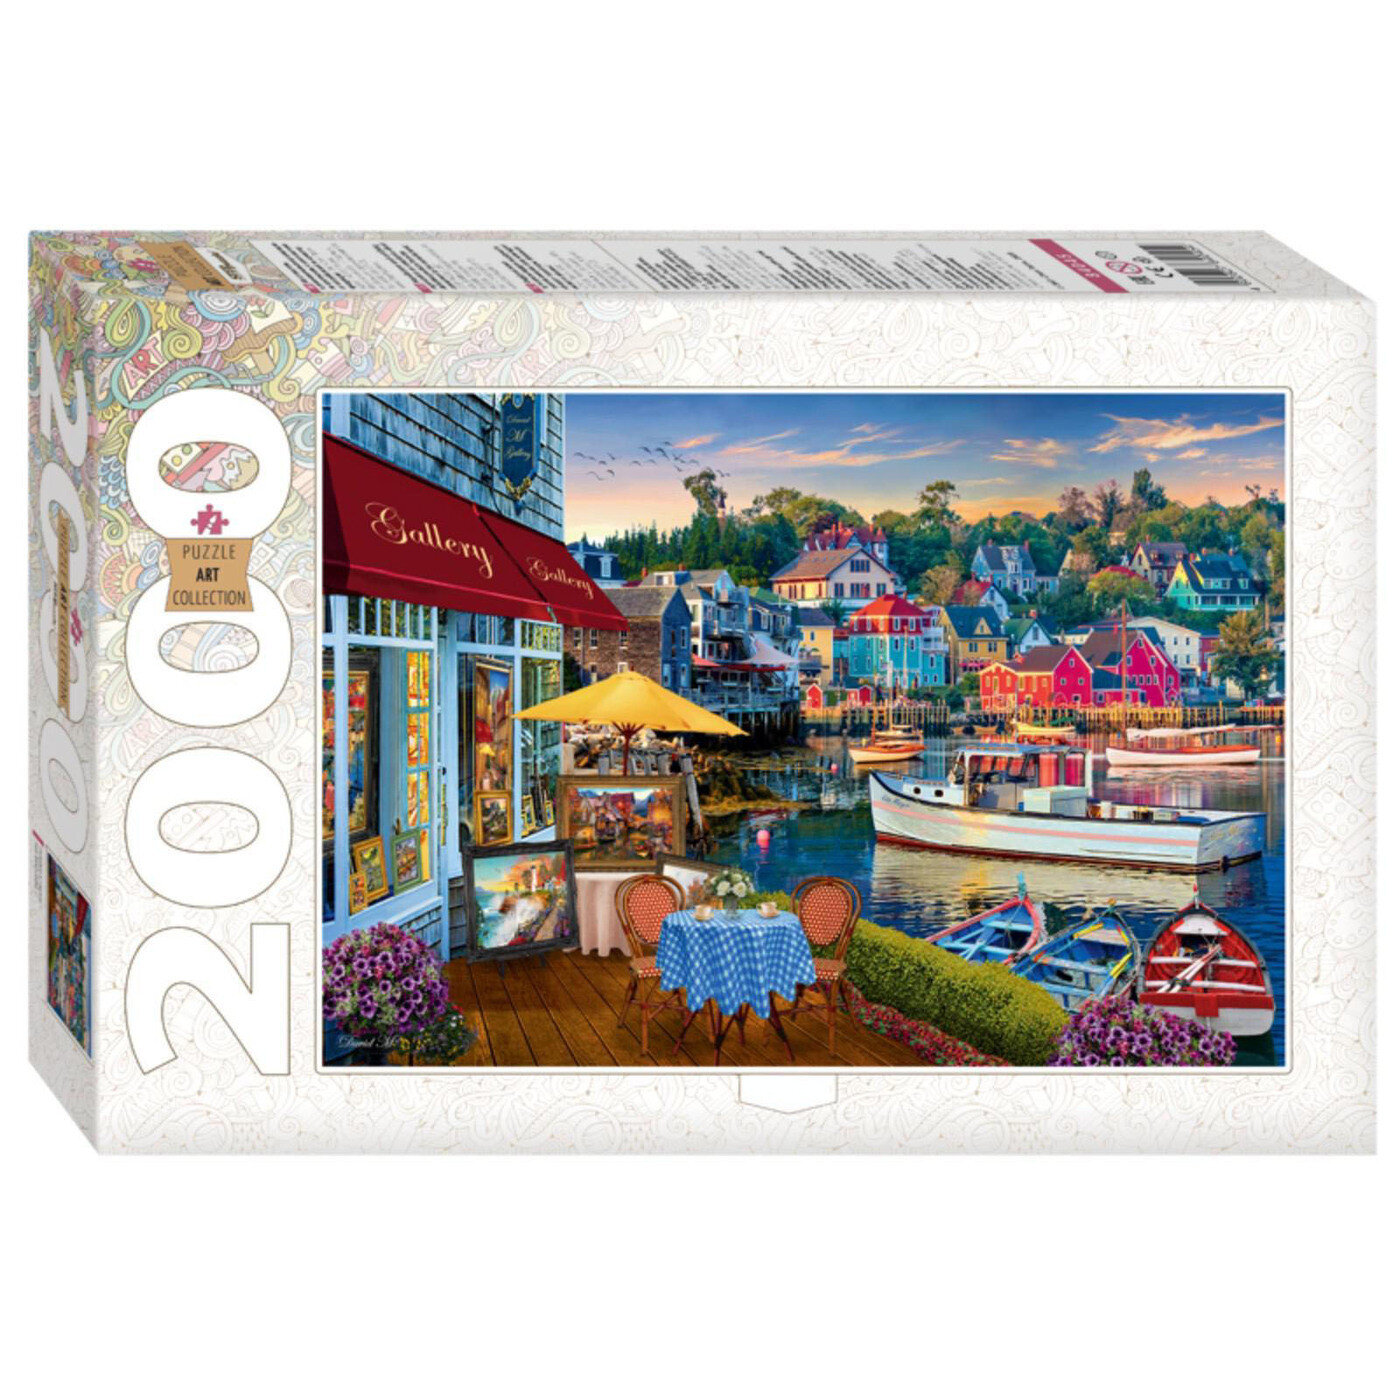 Jigsaw Puzzles for Adults 4000 Piece Puzzle for Adults or Kids,Colorful and Beautiful Pictures Toy Gifts Family Games Home Decoration